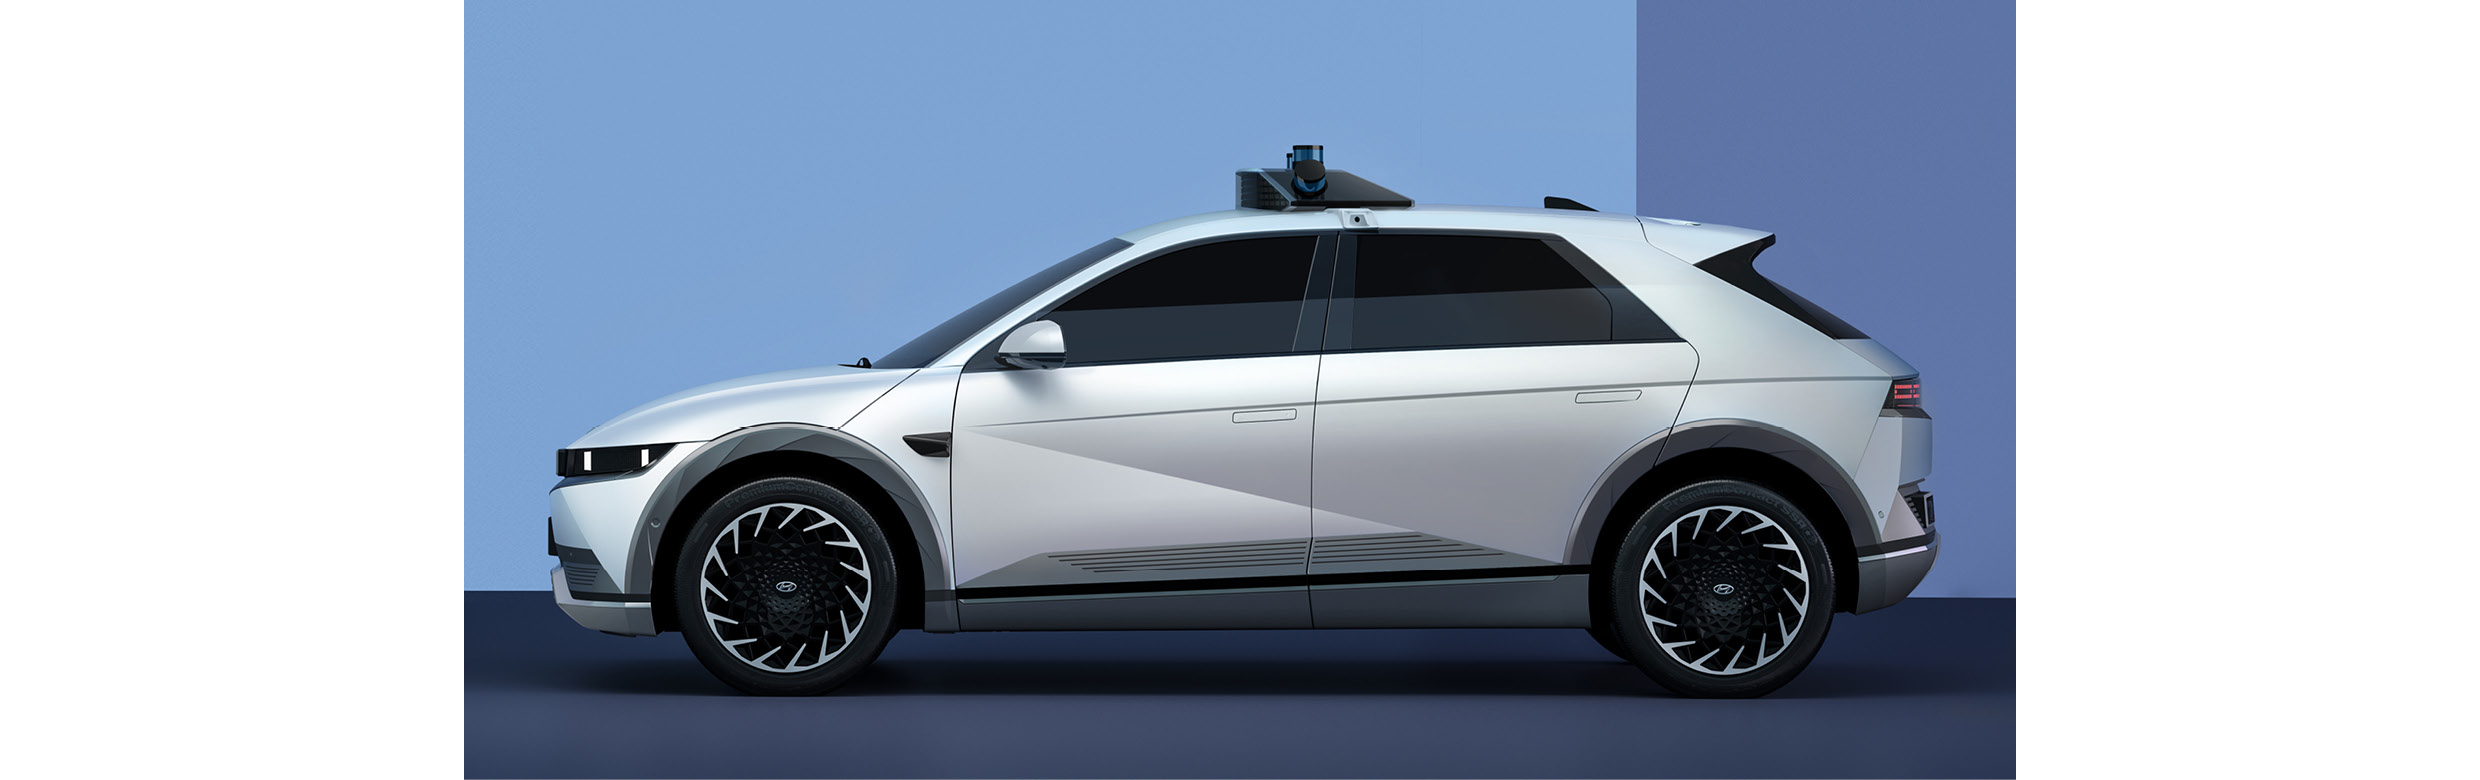 Appearance of Ioniq 5 equipped with devices for implementing autonomous driving technology